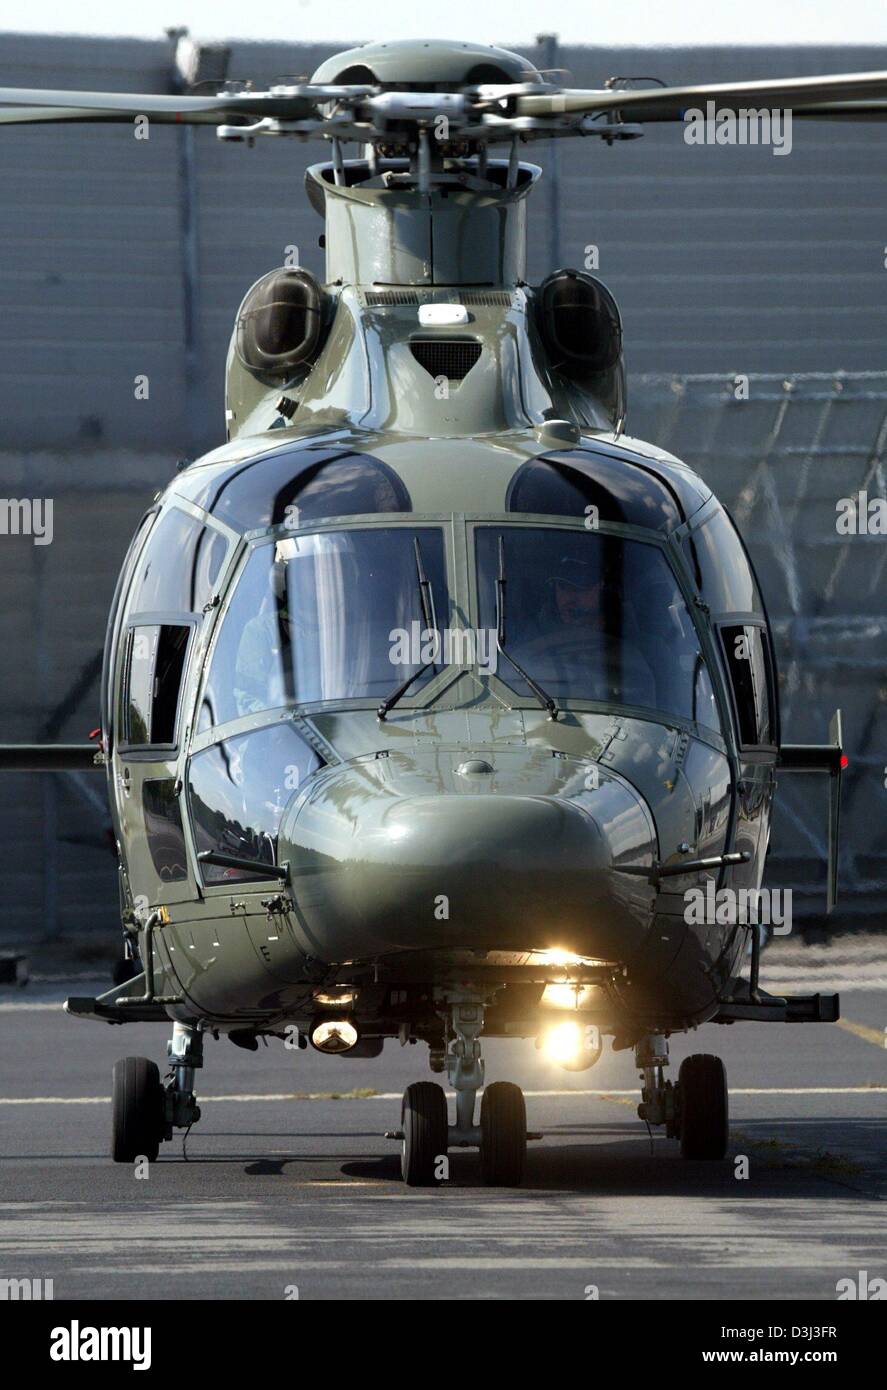 (dpa) - One of the two new high-tech helicopters type EC 155 of the police in the state of North Rhine Westphalia, stands on the airfield of the airport in Dortmund, Germany, 3 September 2003. Stock Photo